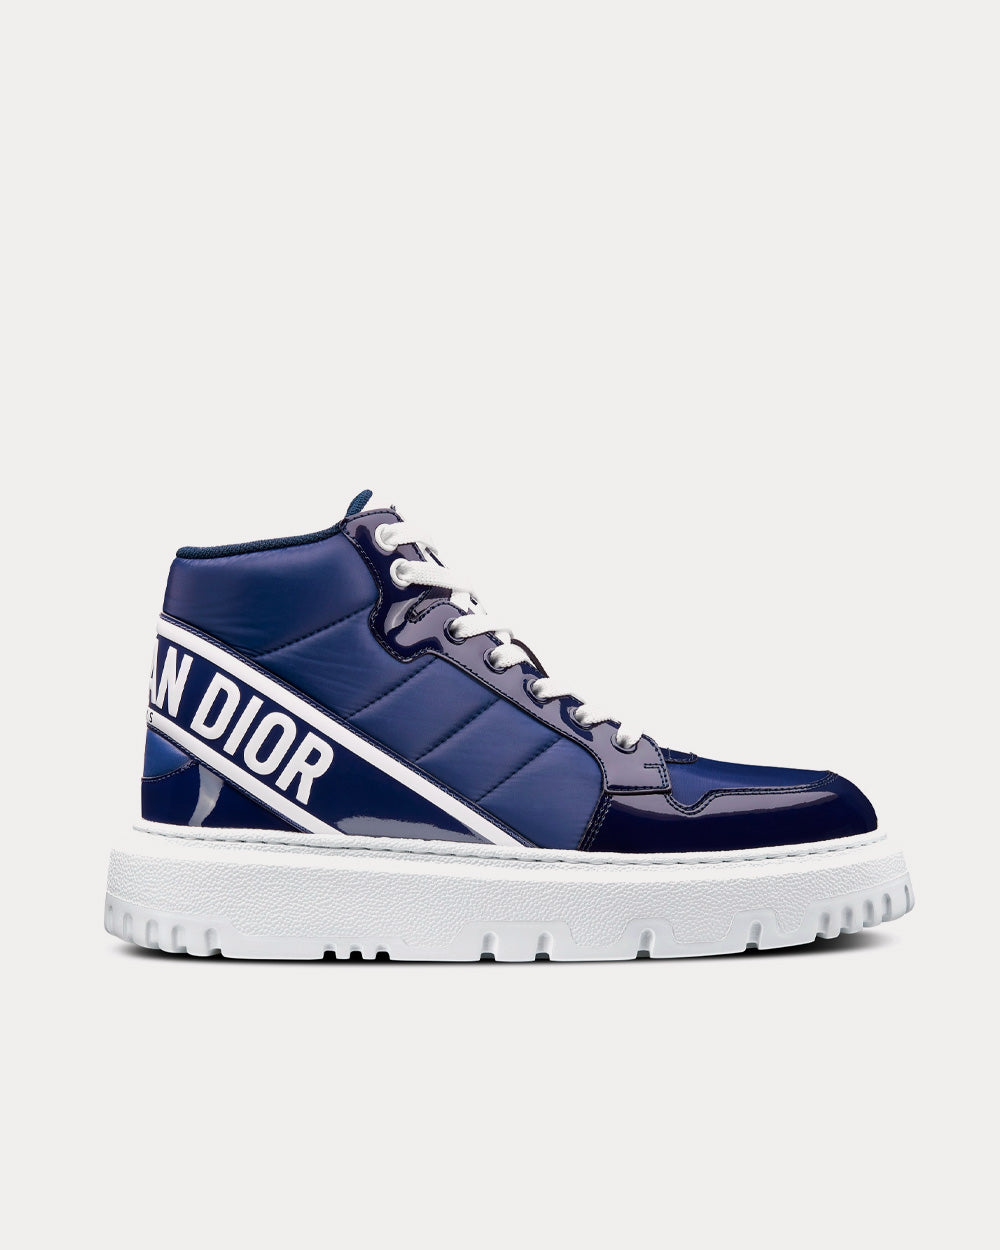 B57 Mid-Top Sneaker Navy Blue and White Smooth Calfskin with Beige and  Black Dior Oblique Jacquard